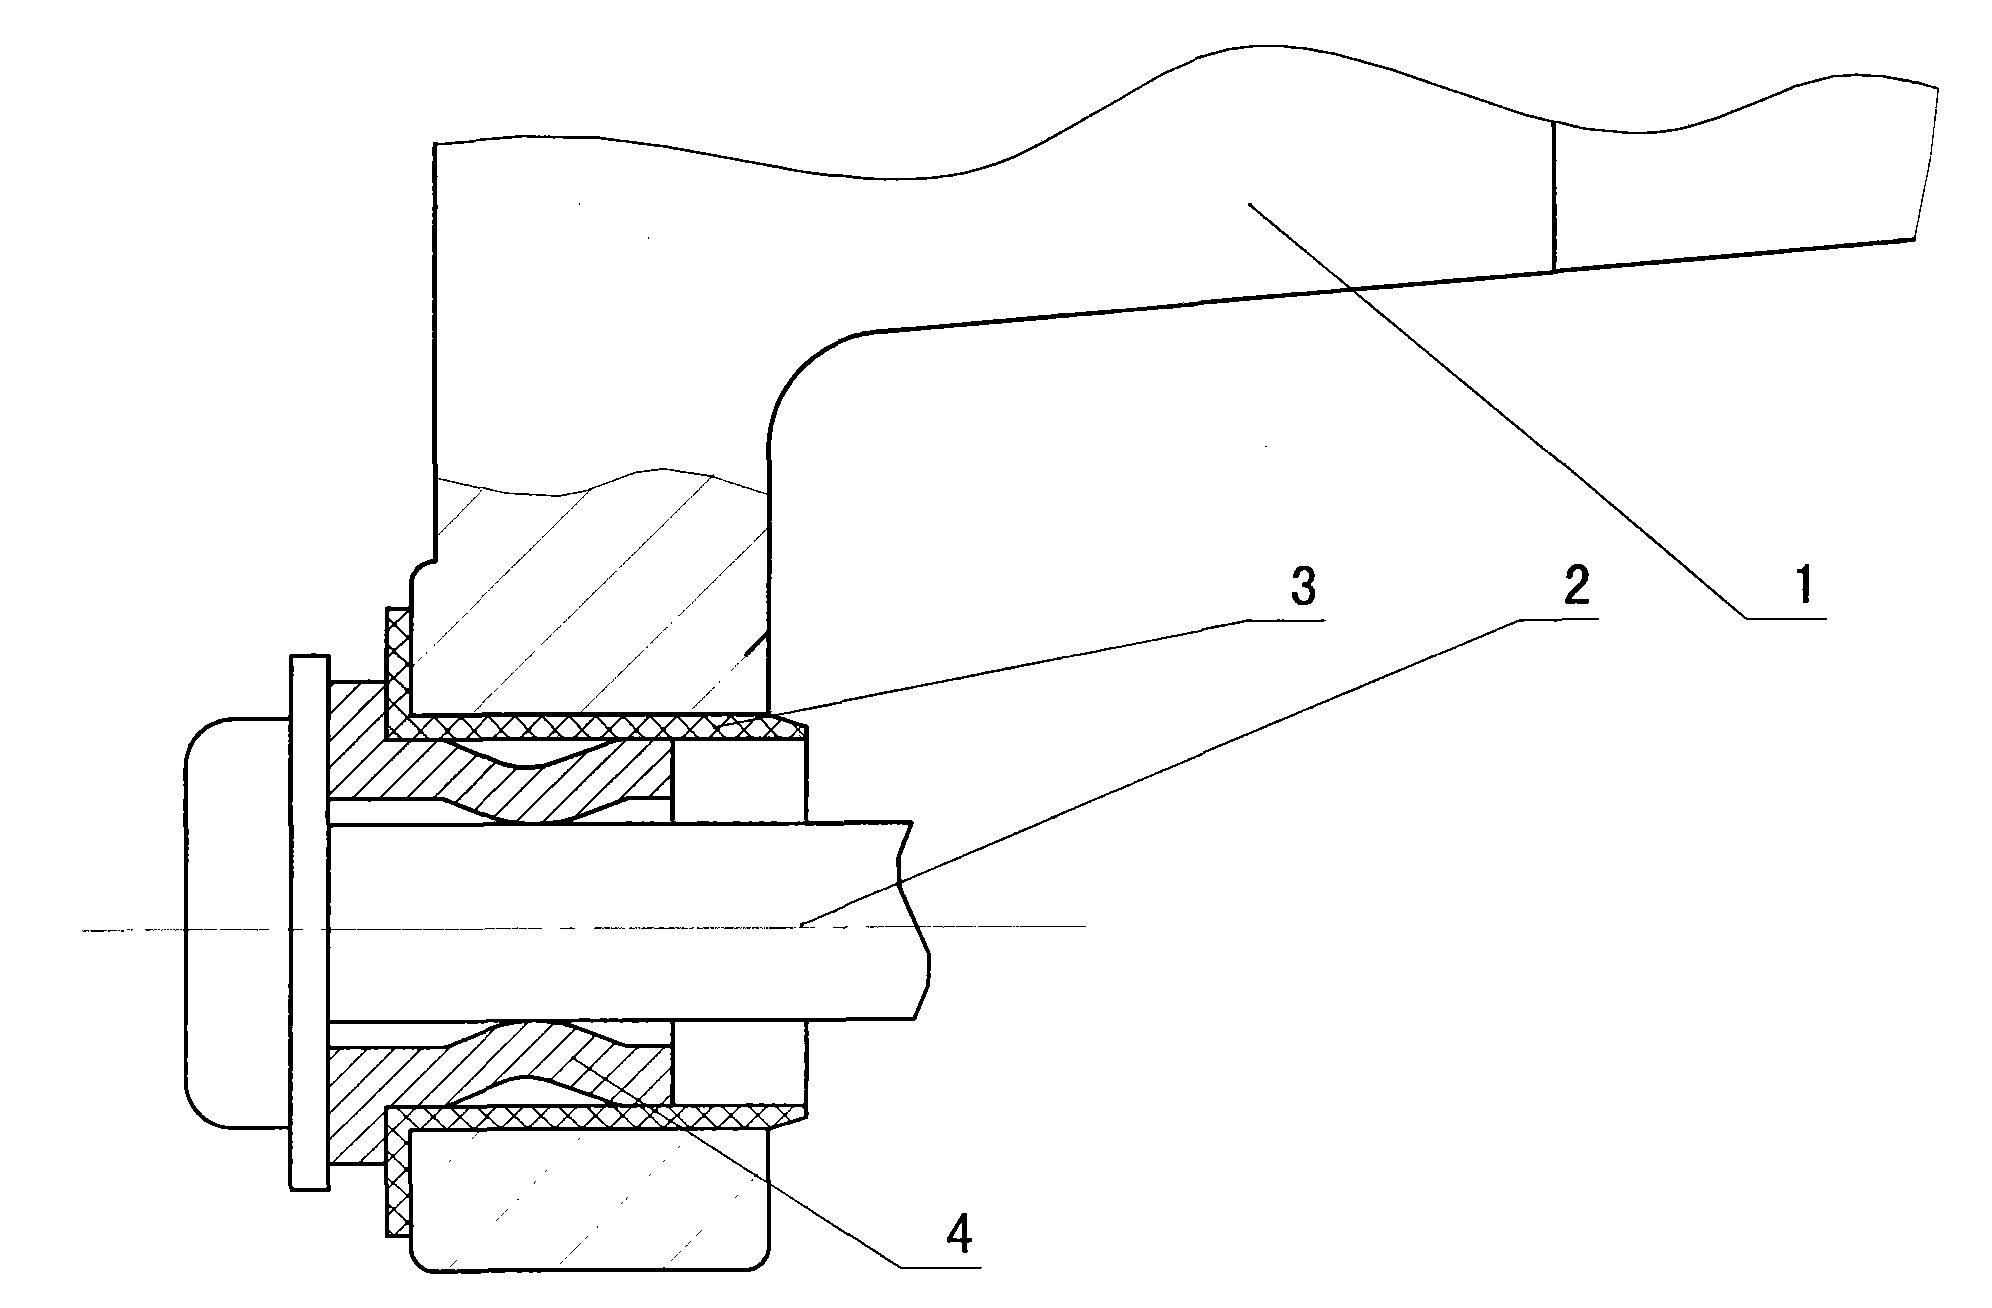 Connecting structure for vehicular generator for eliminating coupling of mechanical vibration noise